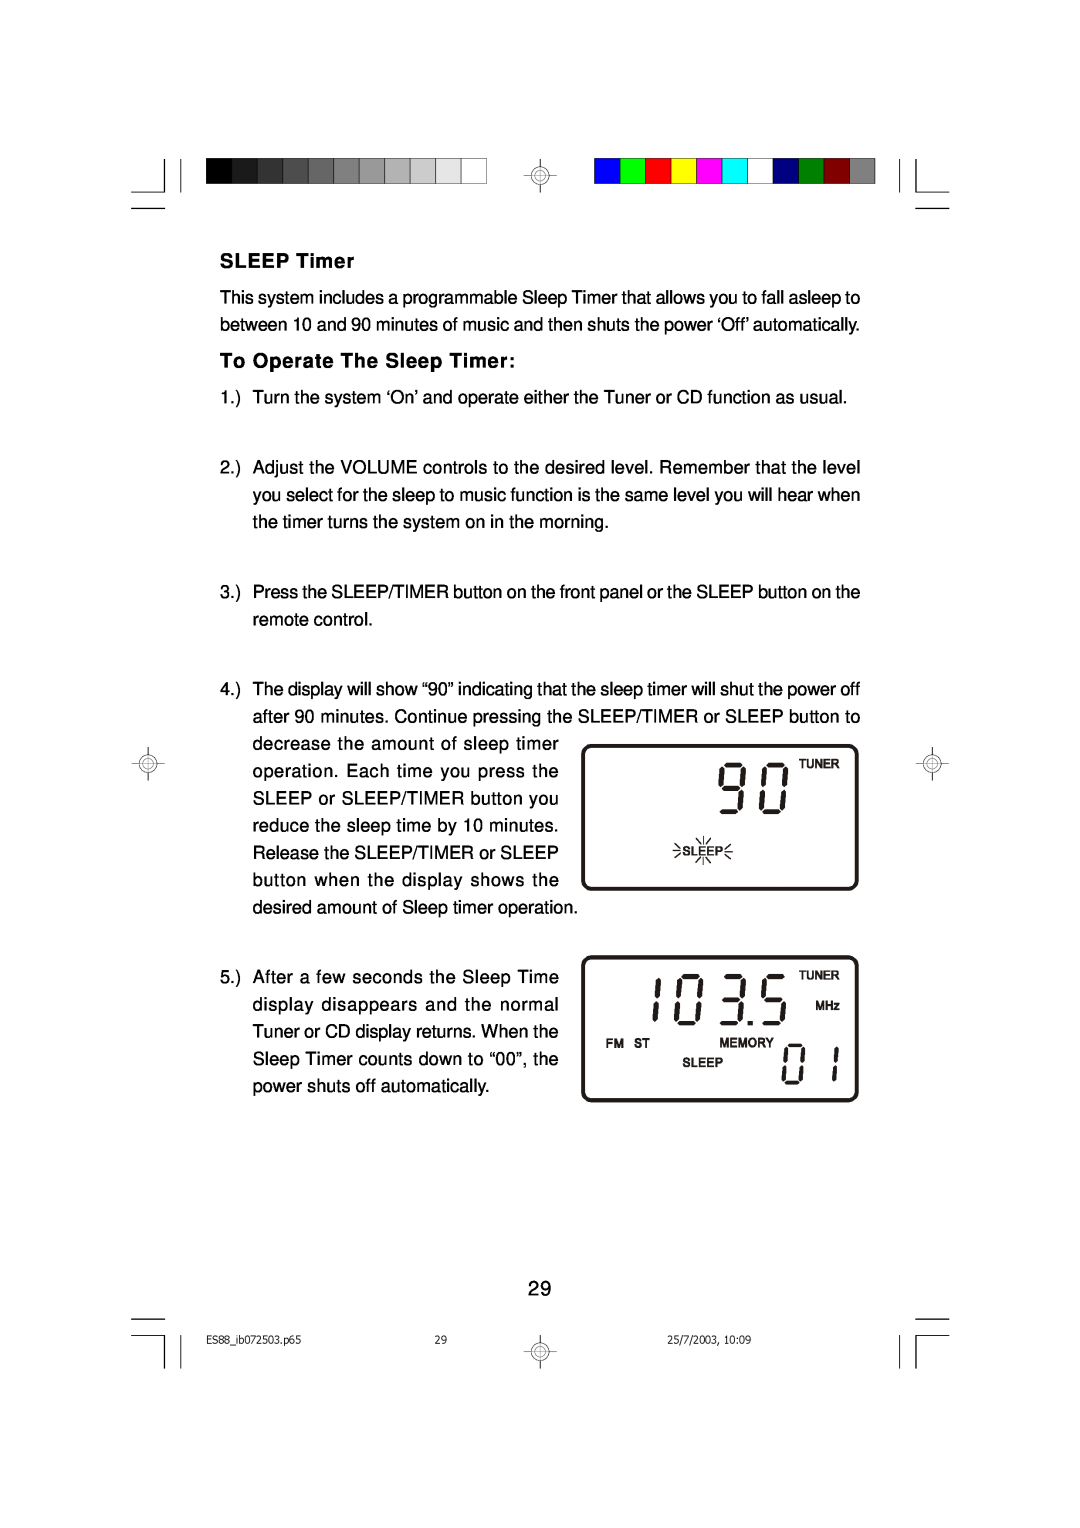 Emerson ES88 owner manual SLEEP Timer, To Operate The Sleep Timer 